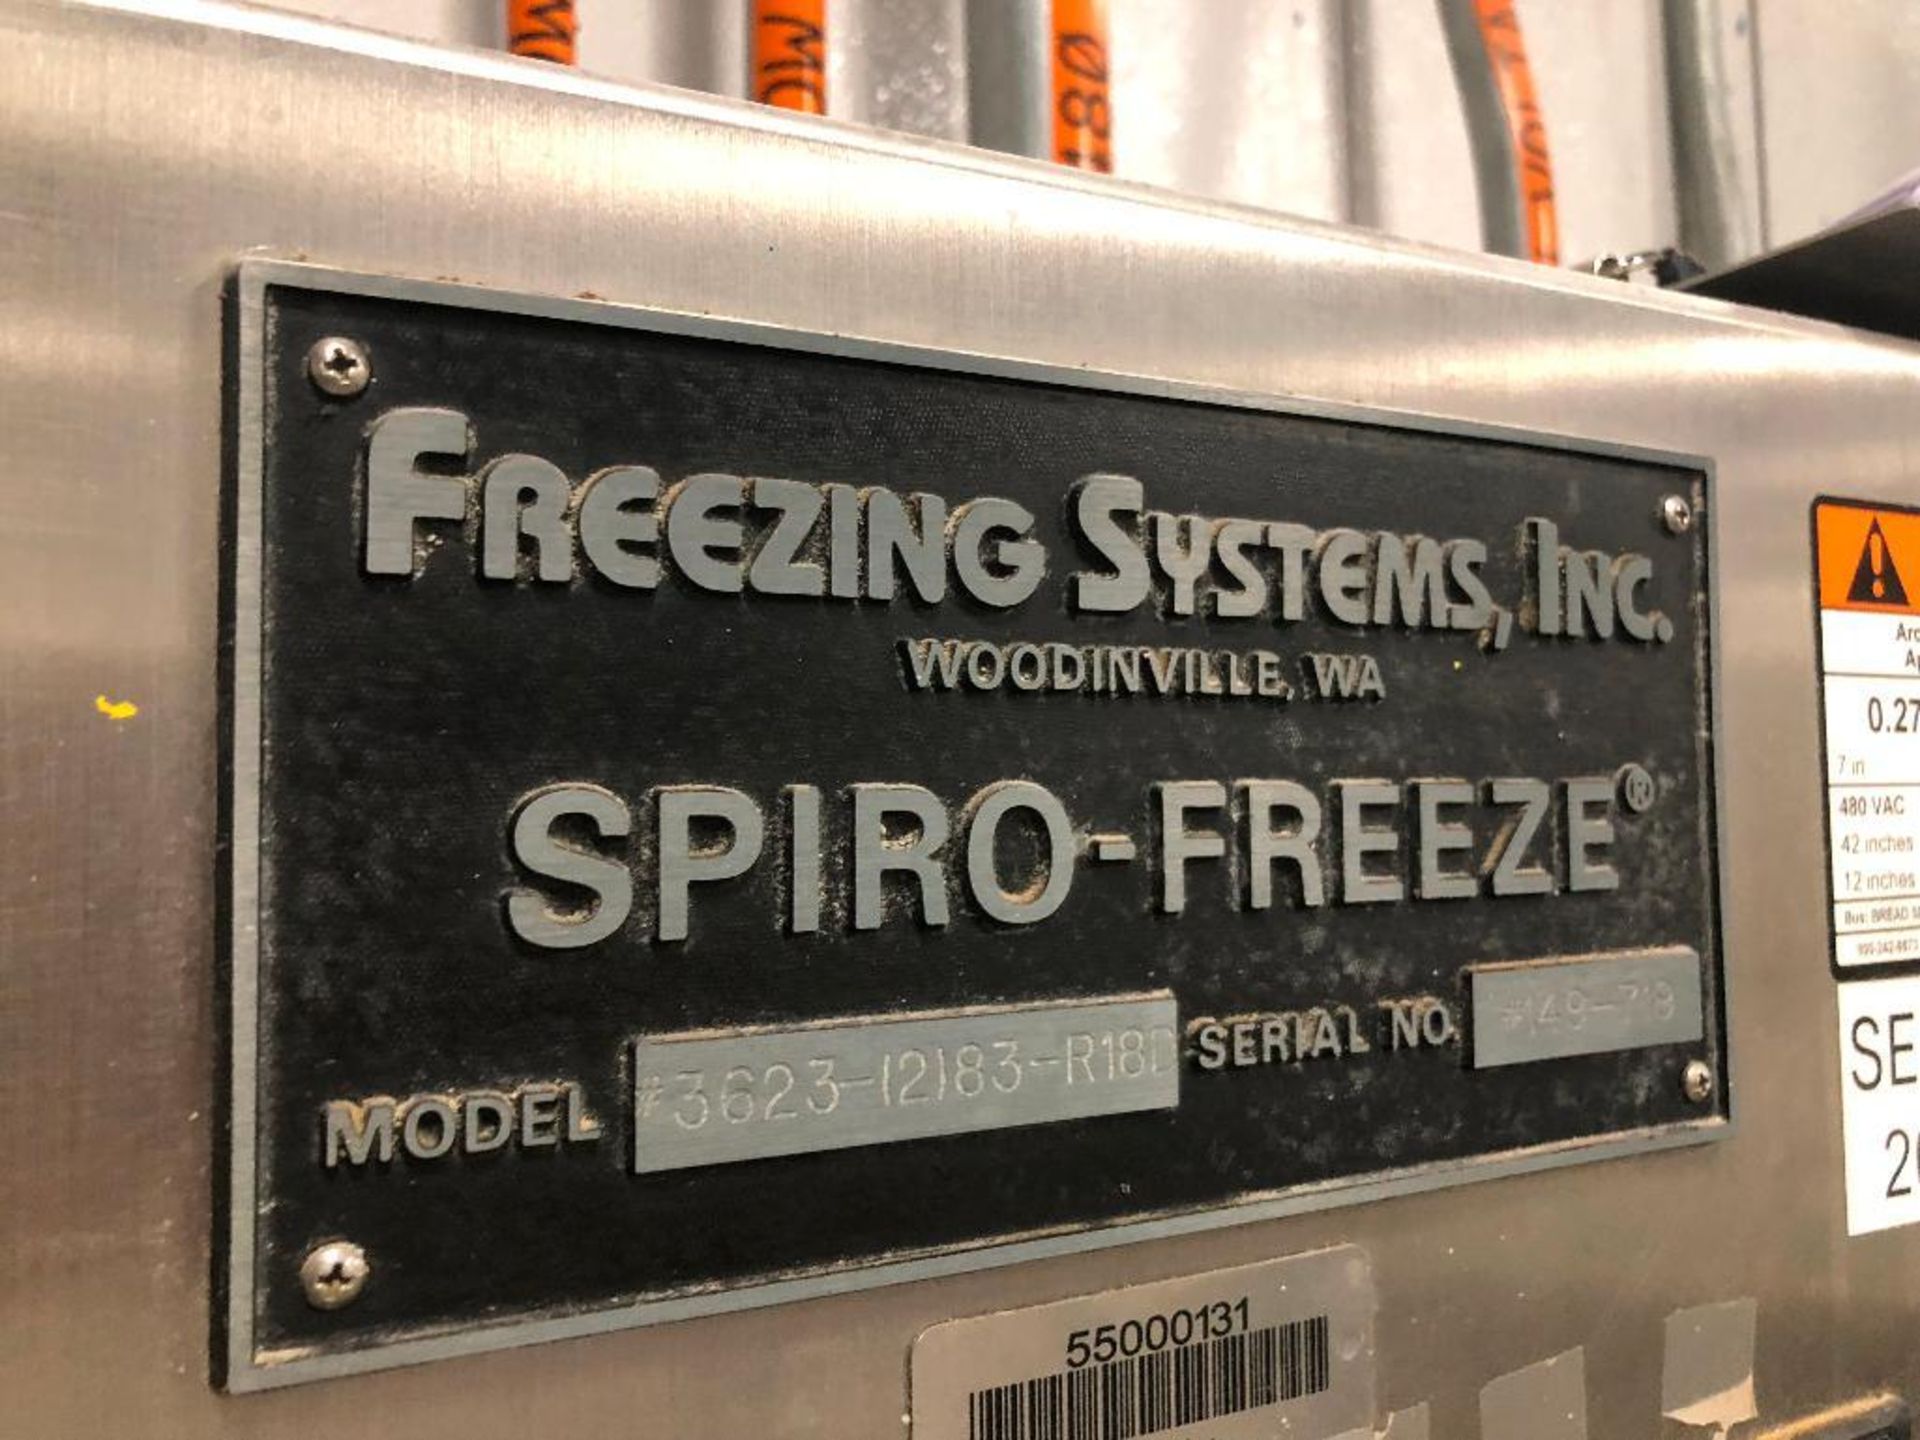 SpiroFreeze sprial freezer, model 3623-12183-R18D, s/n 149-718, 36 in. wide belt, 6 in. clearance, 1 - Image 23 of 27